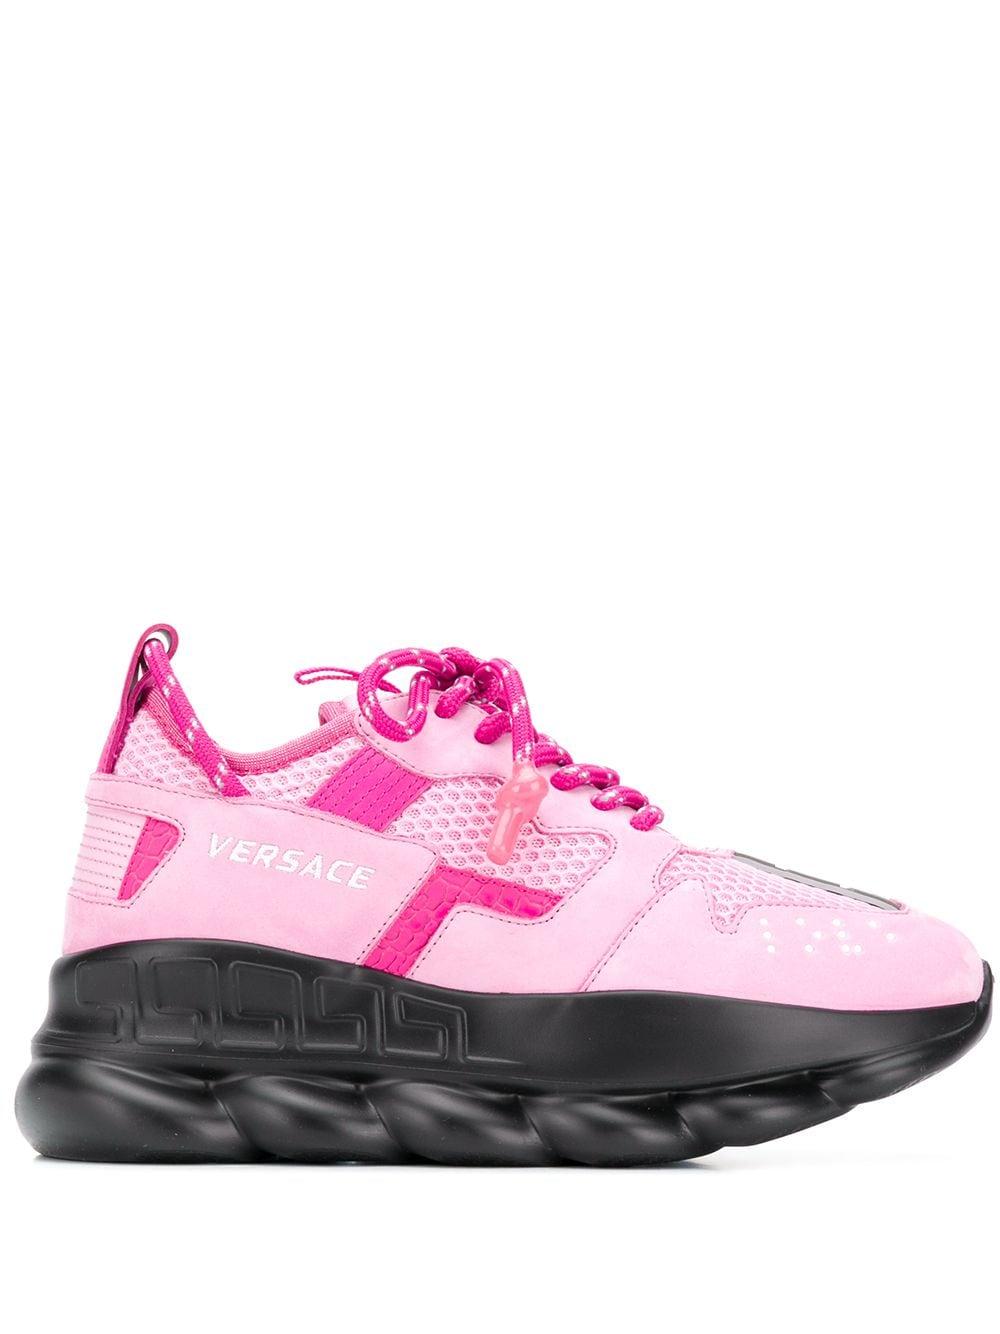 Versace Chain Reaction 2 Sneakers in Pink | Lyst